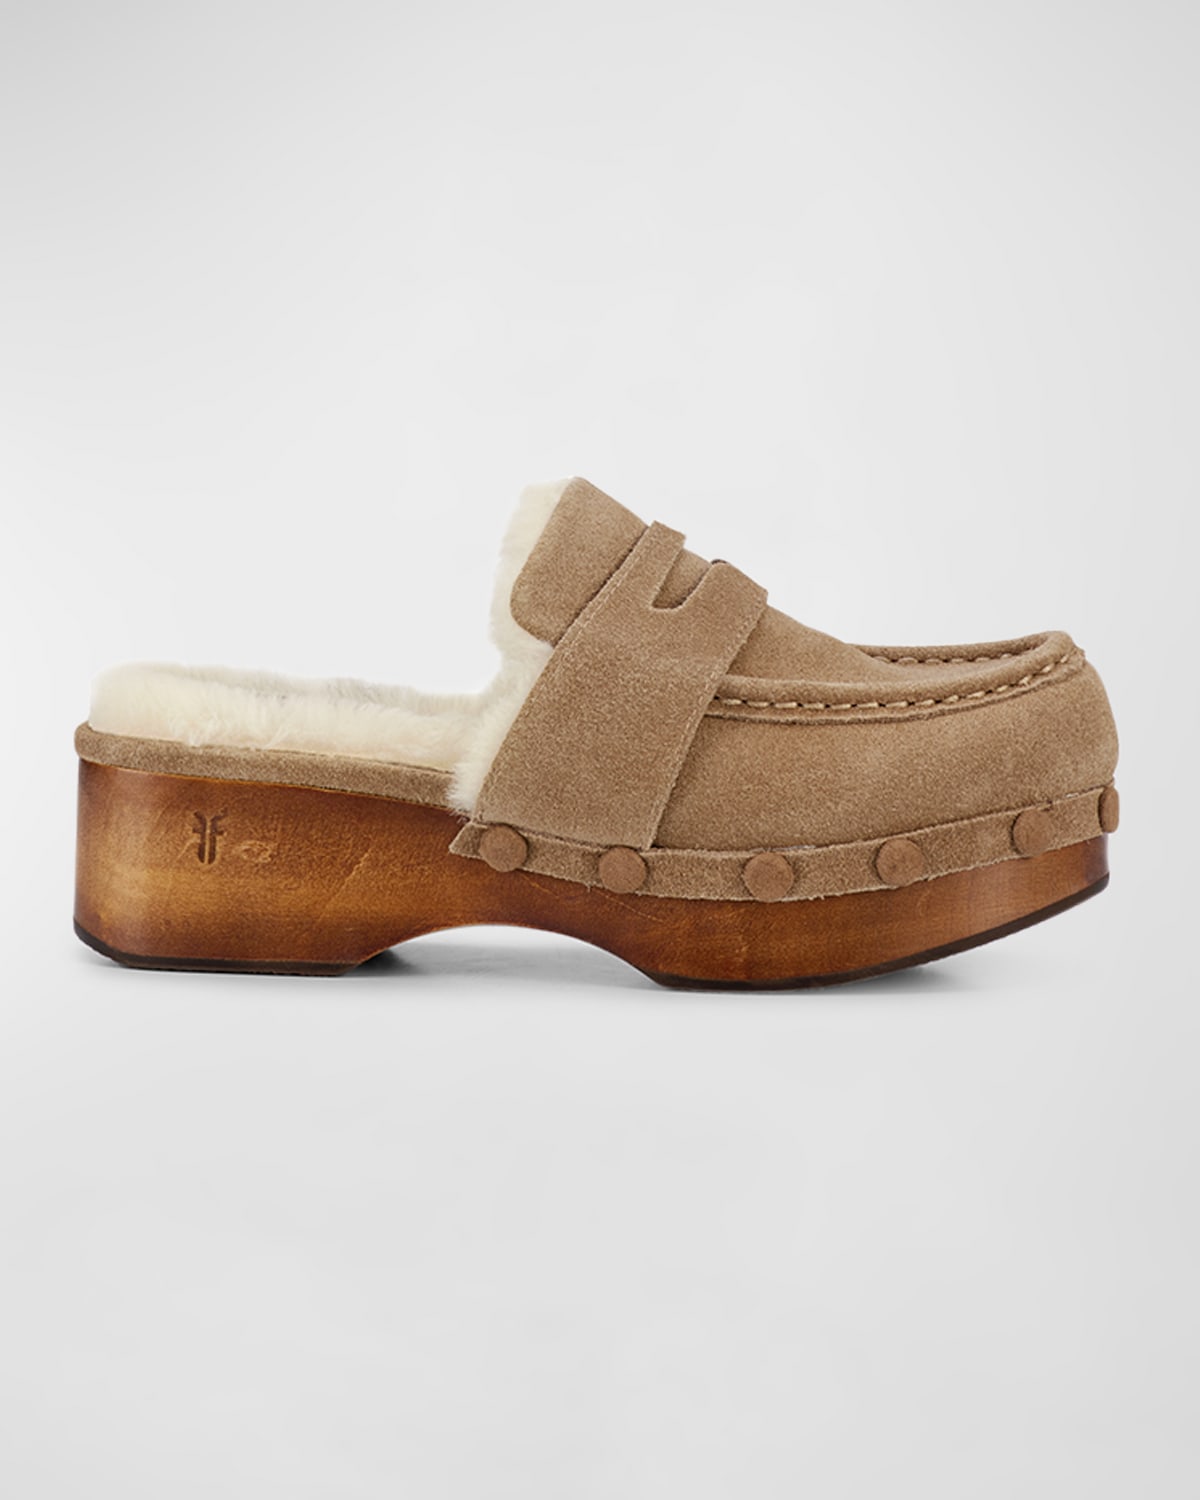 FRYE MELODY SUEDE SHEARLING PENNY LOAFER CLOGS